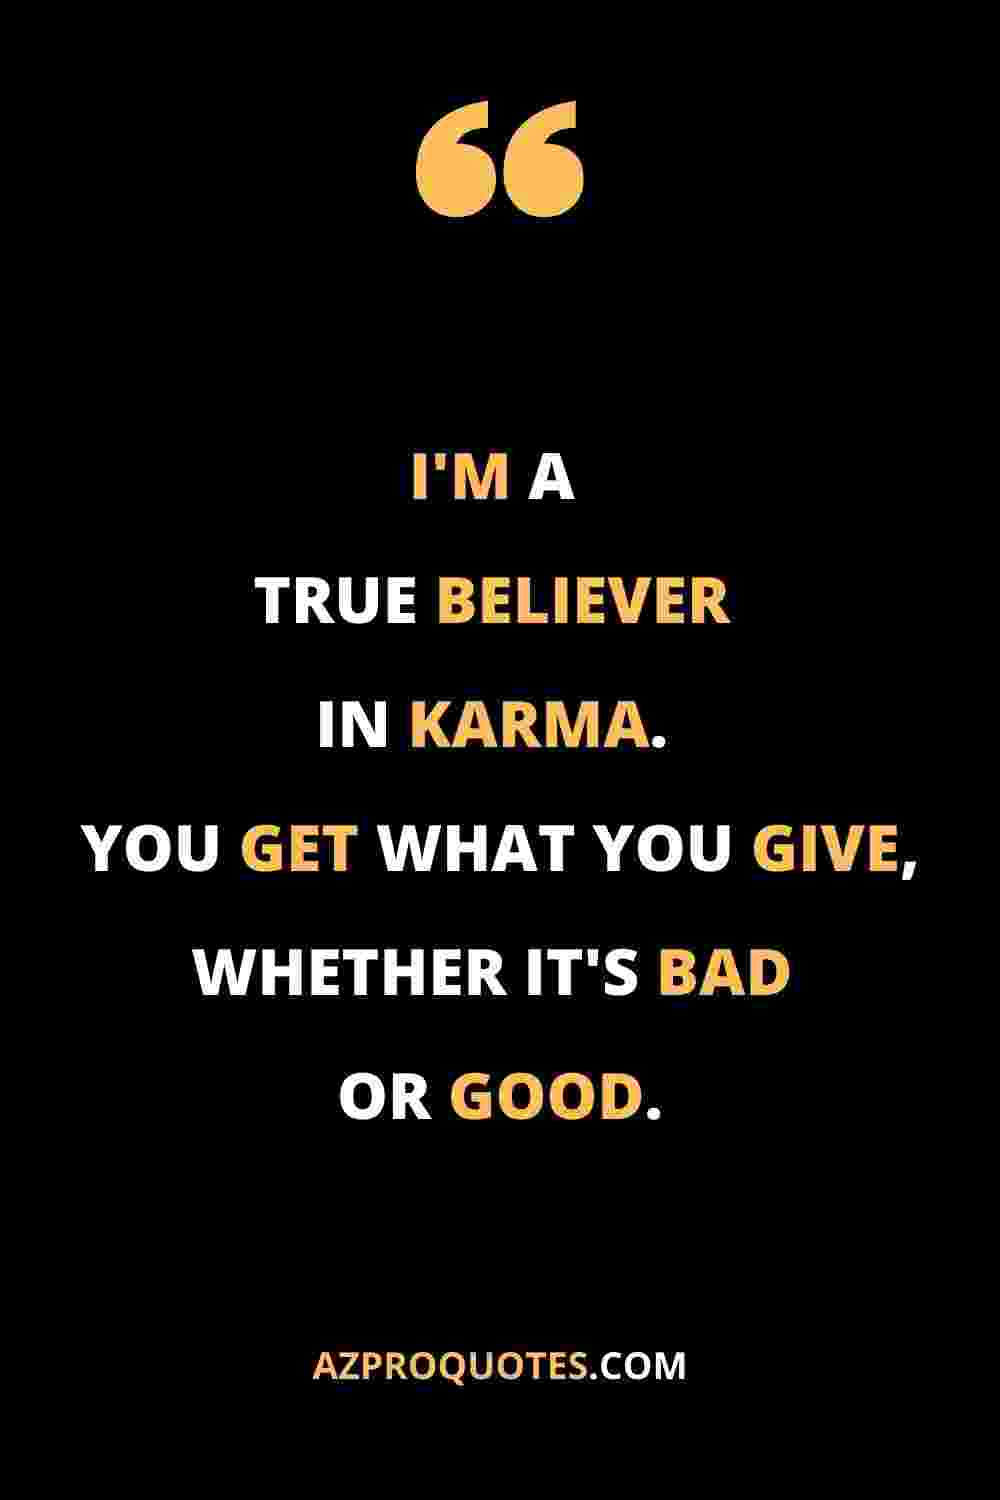 21 Best Karma Quotes And Sayings With Explanation » AzProQuotes